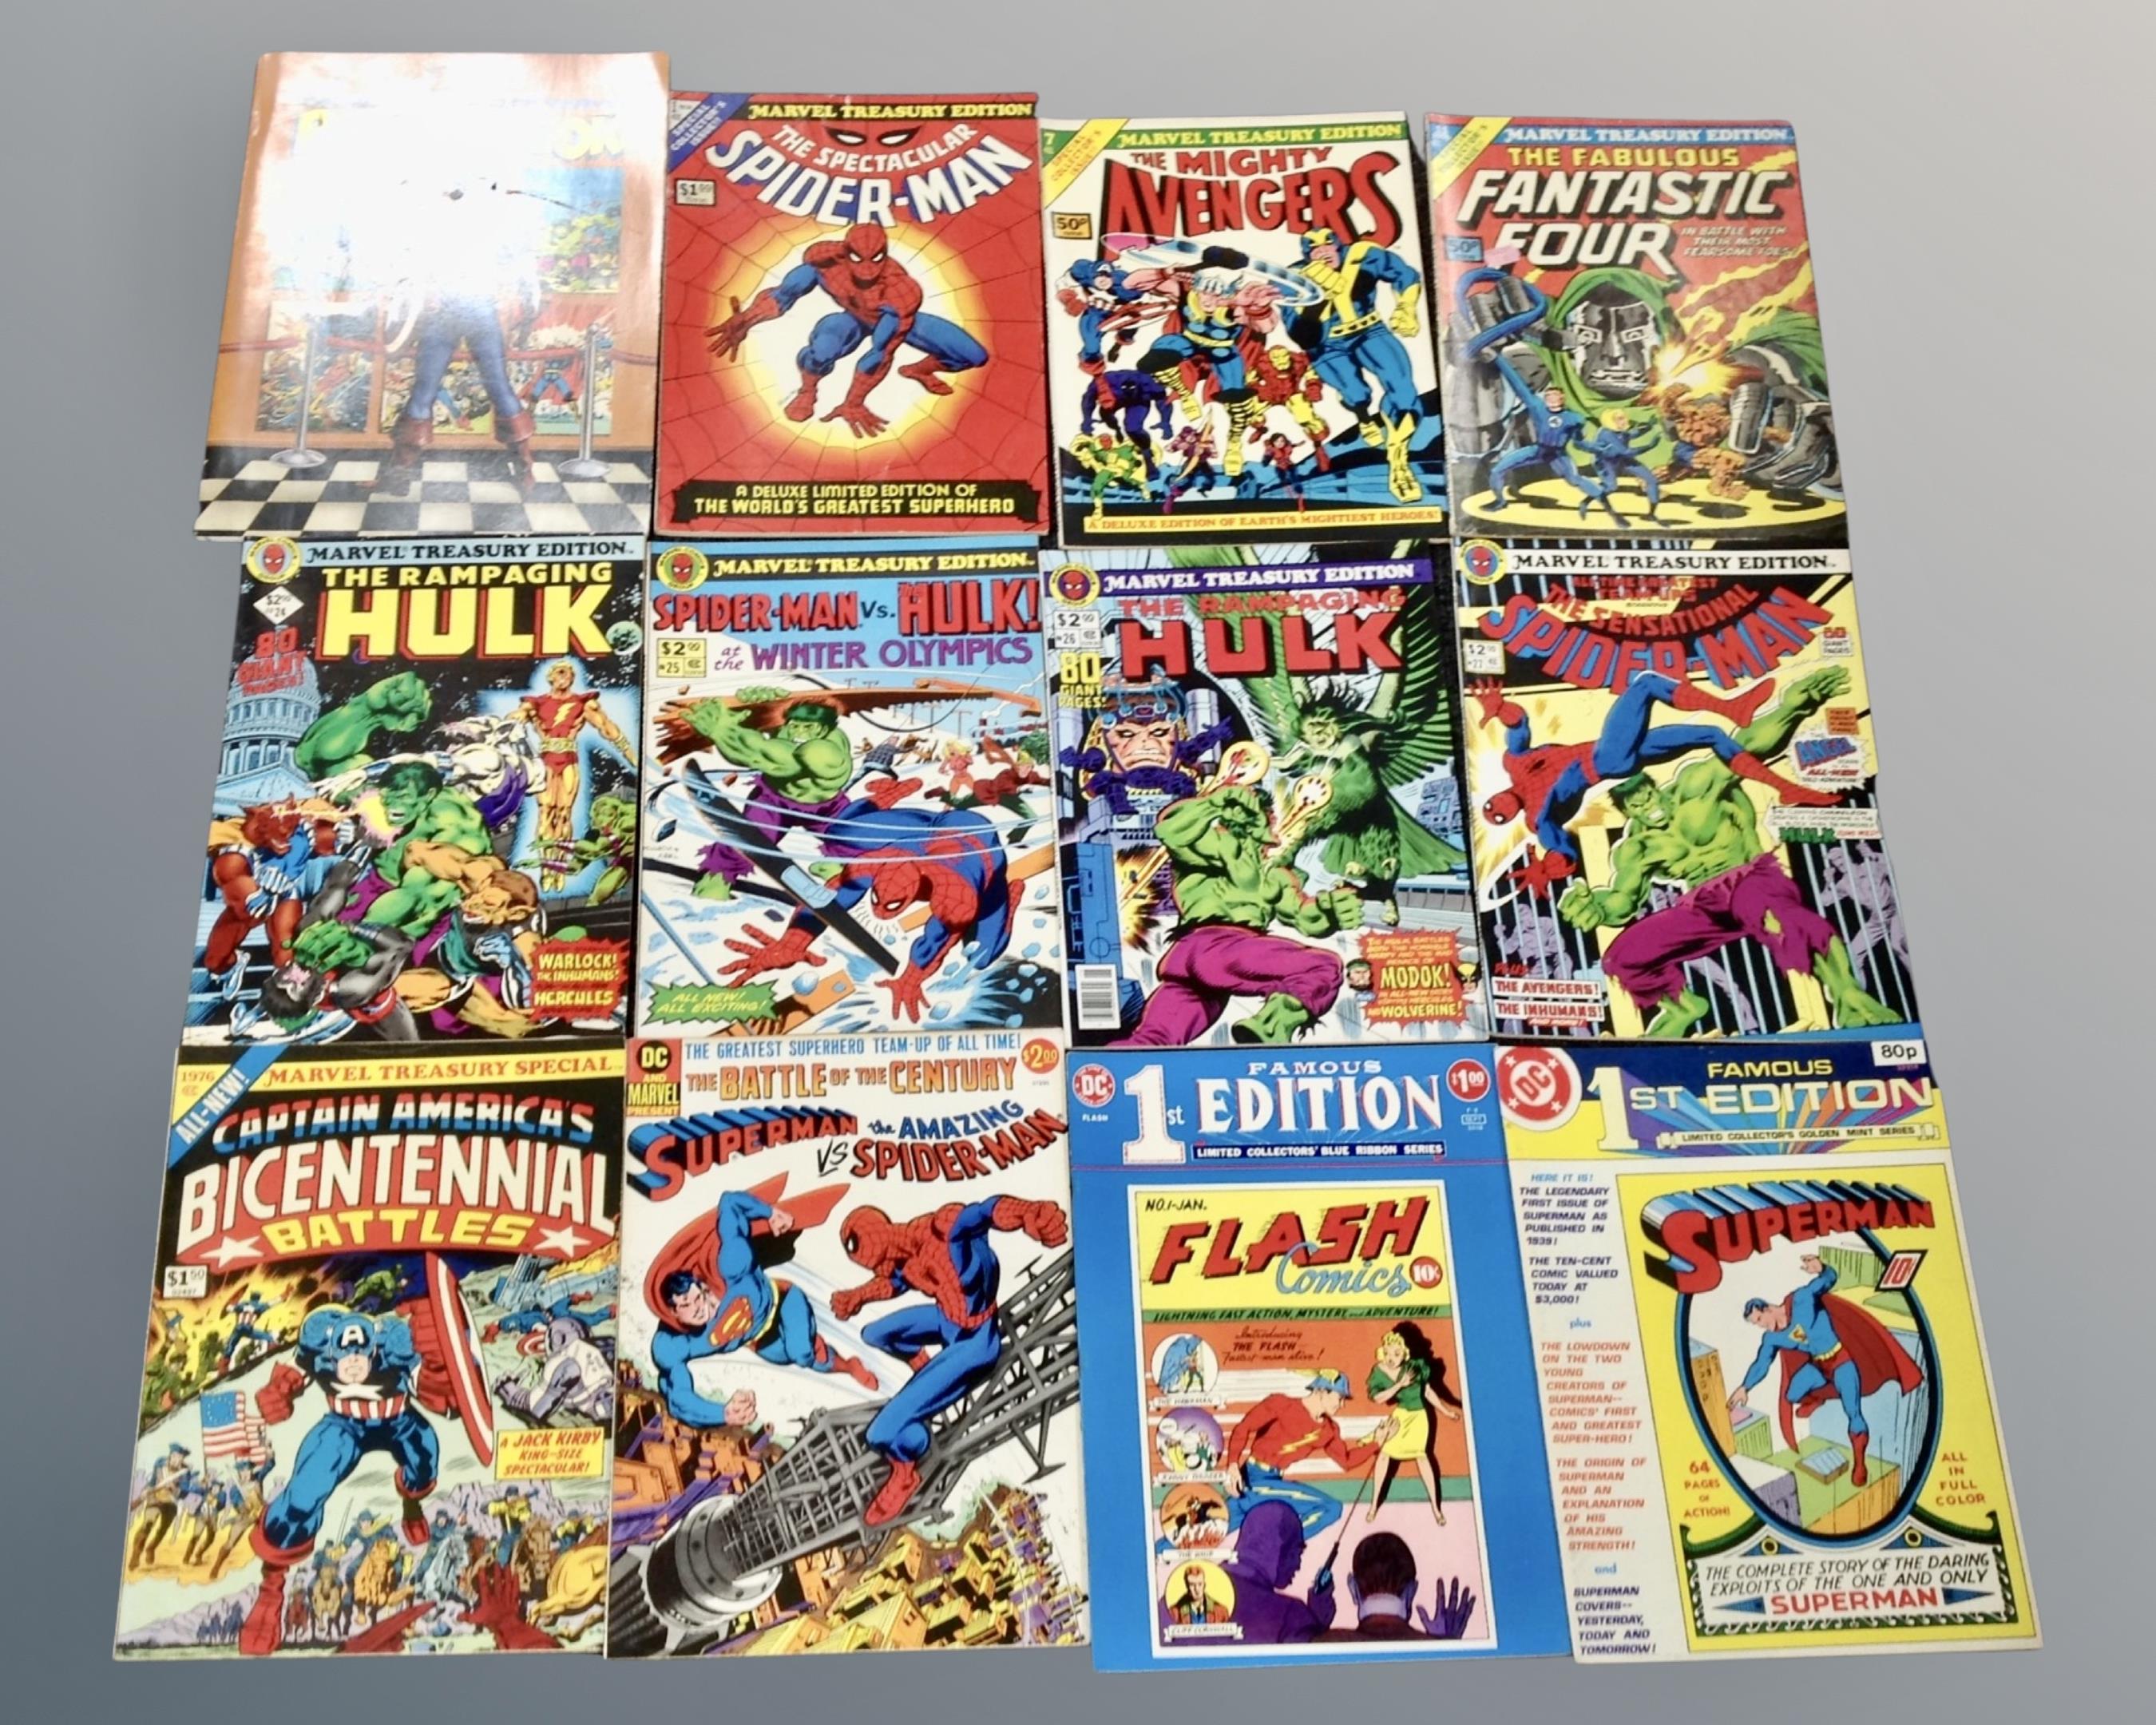 A box containing Marvel Treasury Collector's issues to include 1, 7, 11, 24, 25, 26,